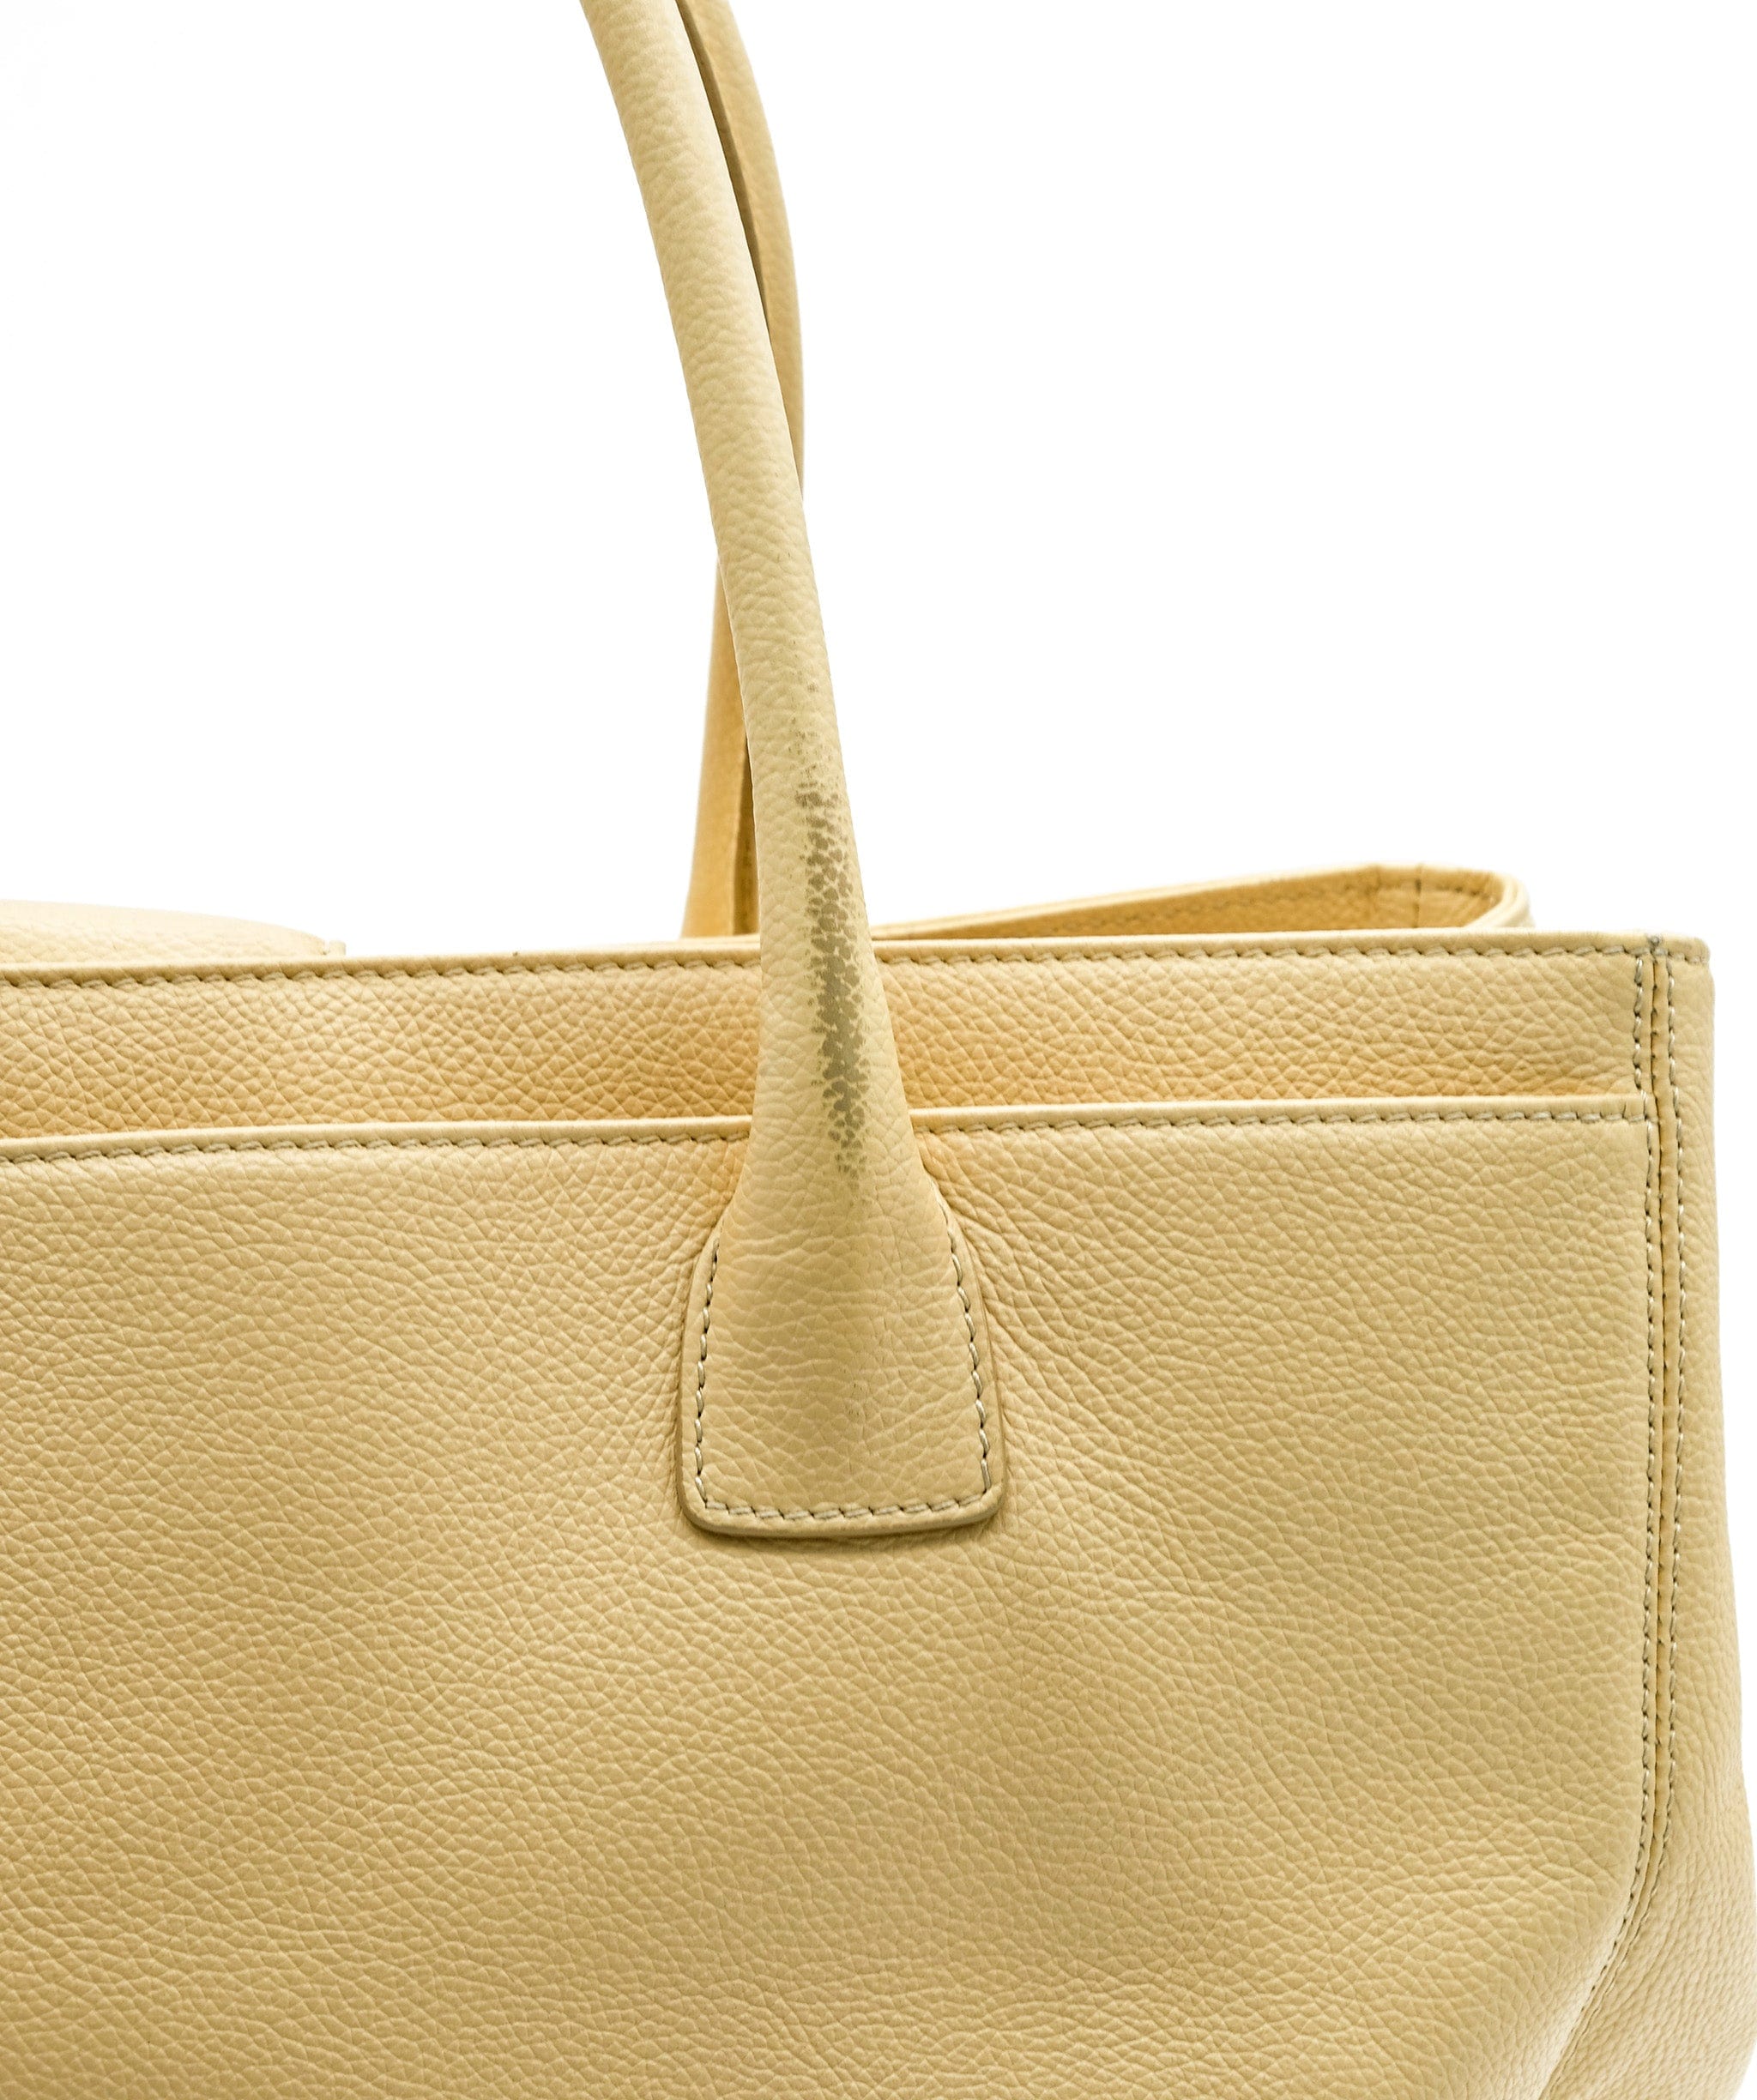 Chanel Chanel Beige Executive Tote RJC1571